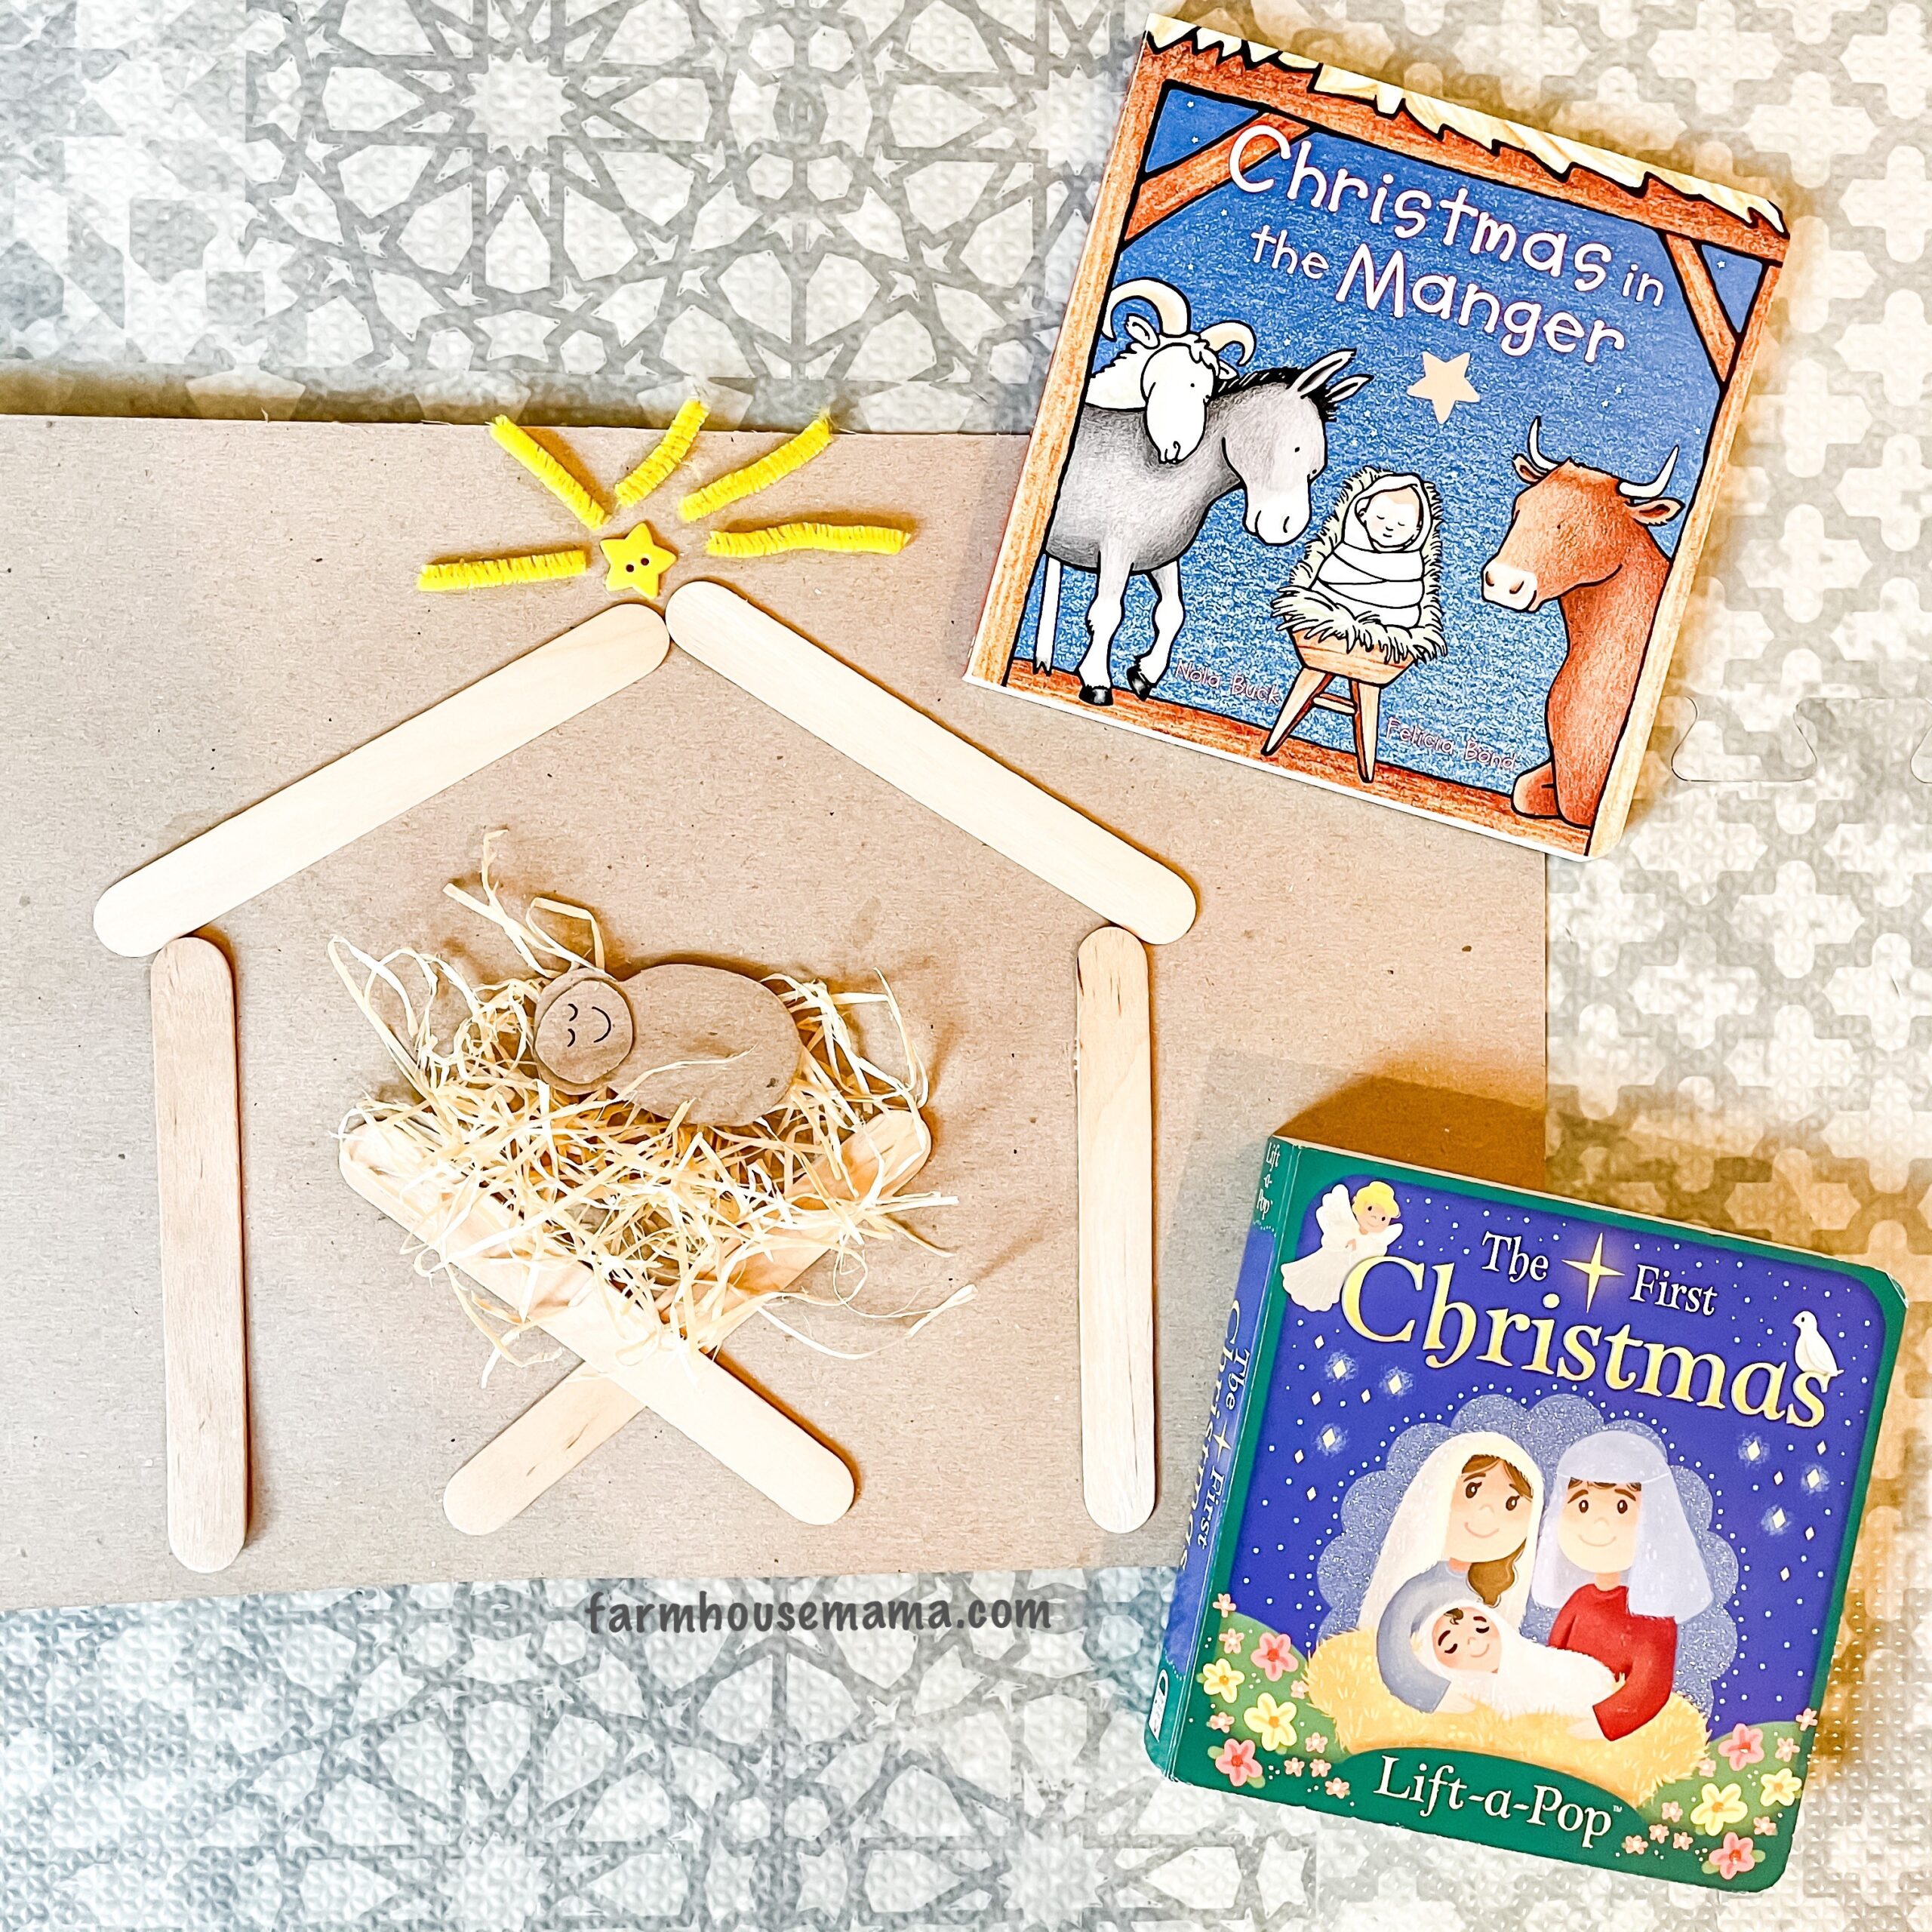 nativity-craft-for-kids-nativity-craft-for-toddlers-nativity-craft-for-preschoolers-nativity